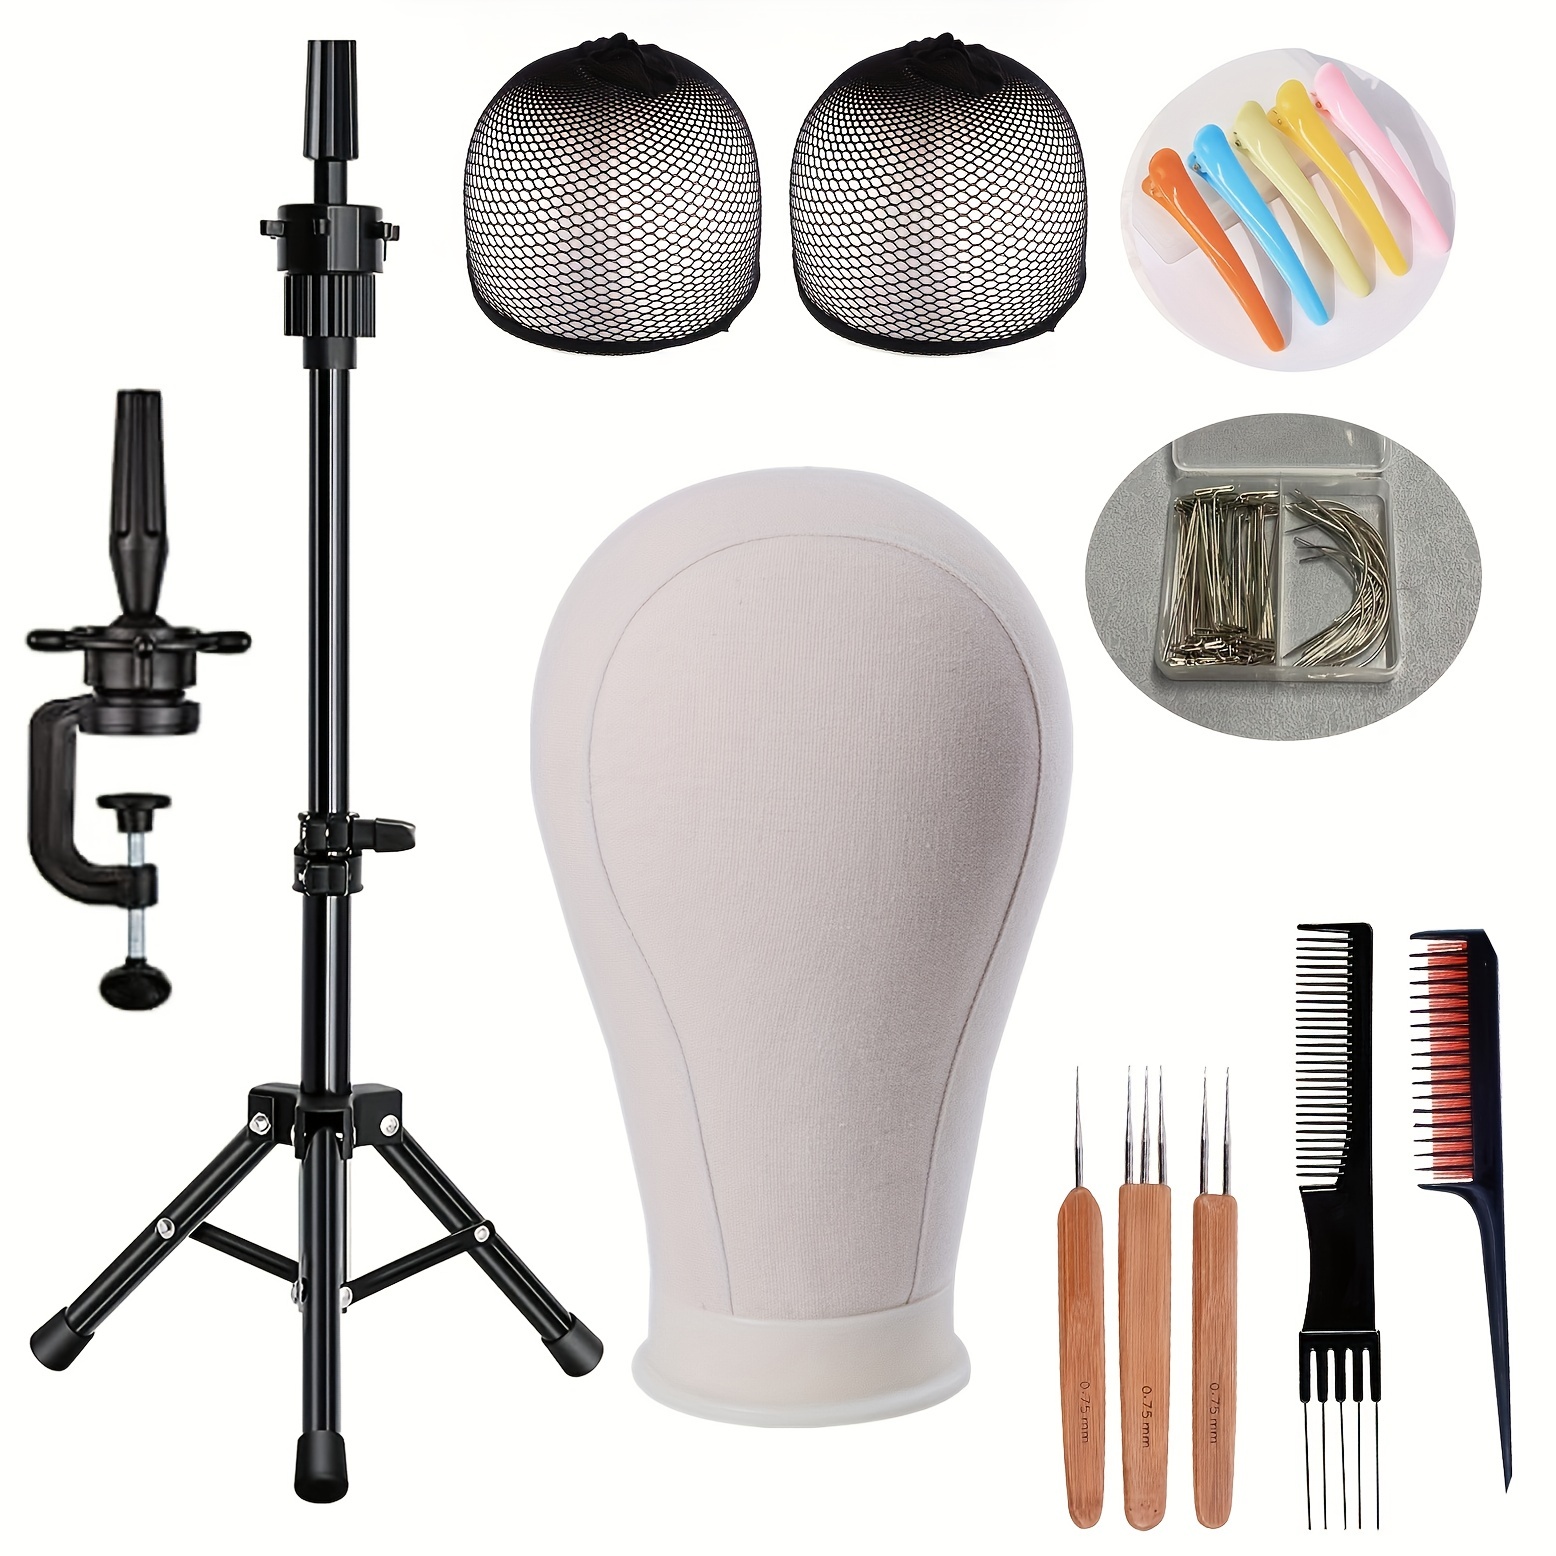 

22 Inch Wig Head, Wig Stand Tripod With Head, Canvas Wig Head, Mannequin Head For Wigs, Manikin Canvas Head Block Set For Wigs Making Display With Wig Caps T/c Pins Set